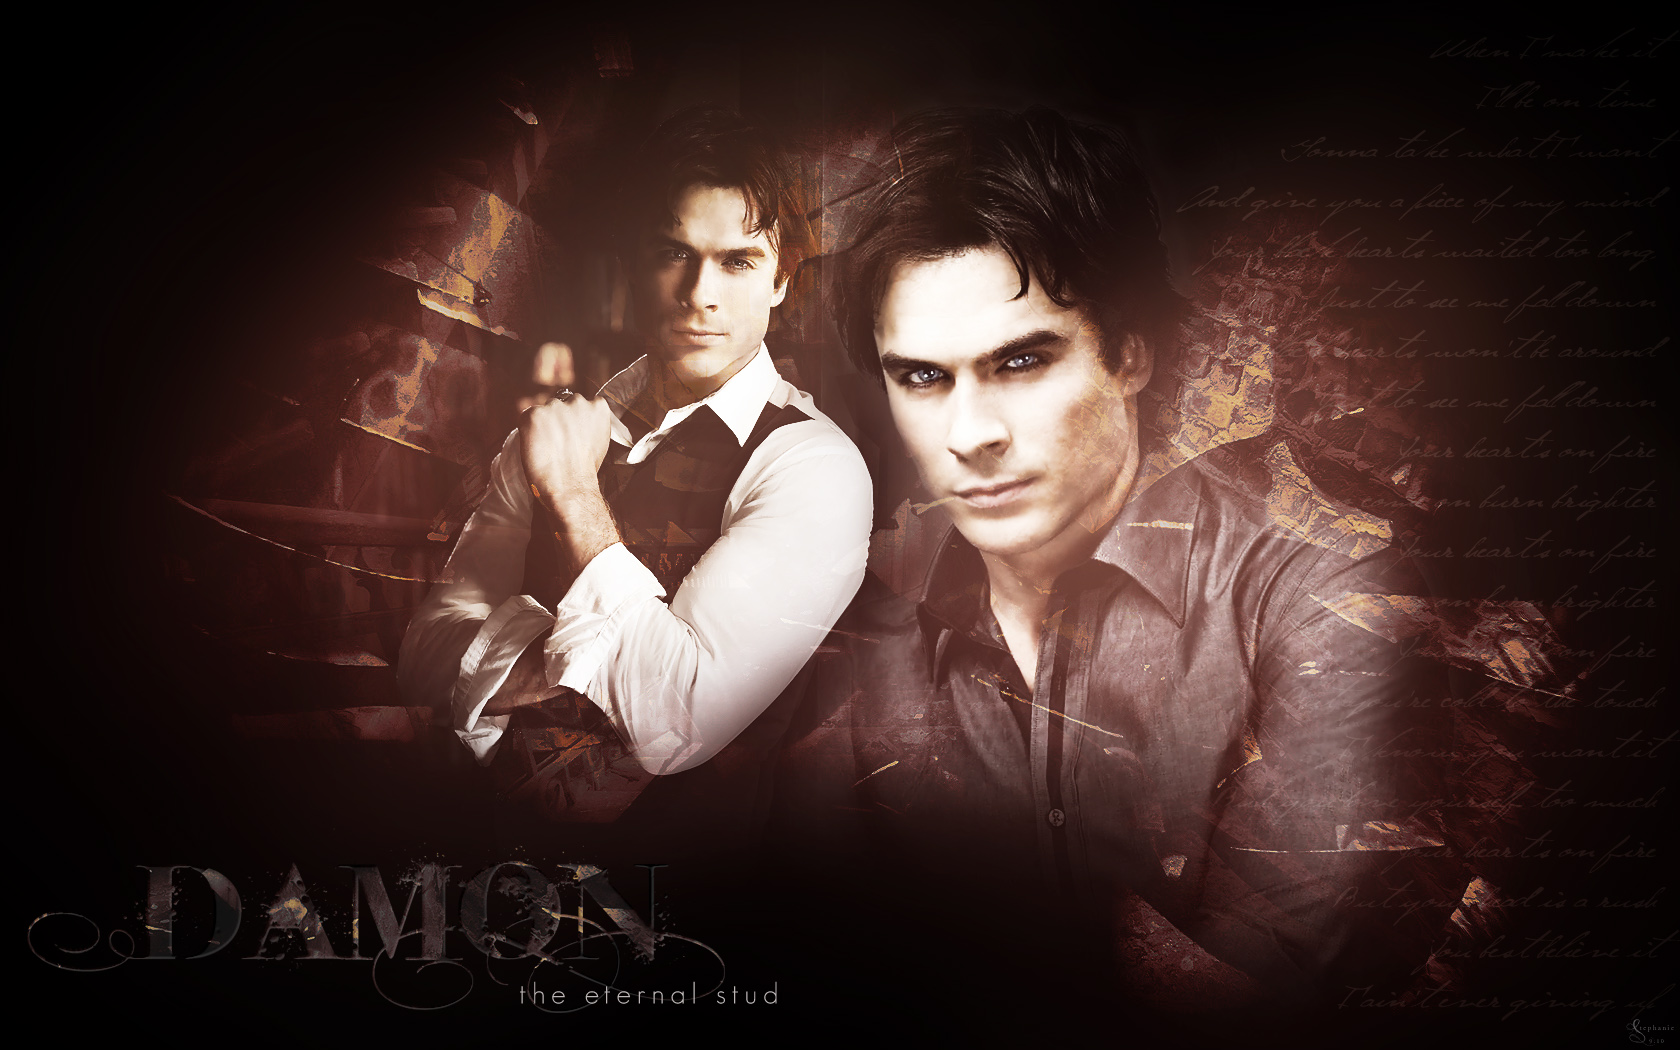 You Can Get Loads More Vampire Diaries Wallpaper Here Too